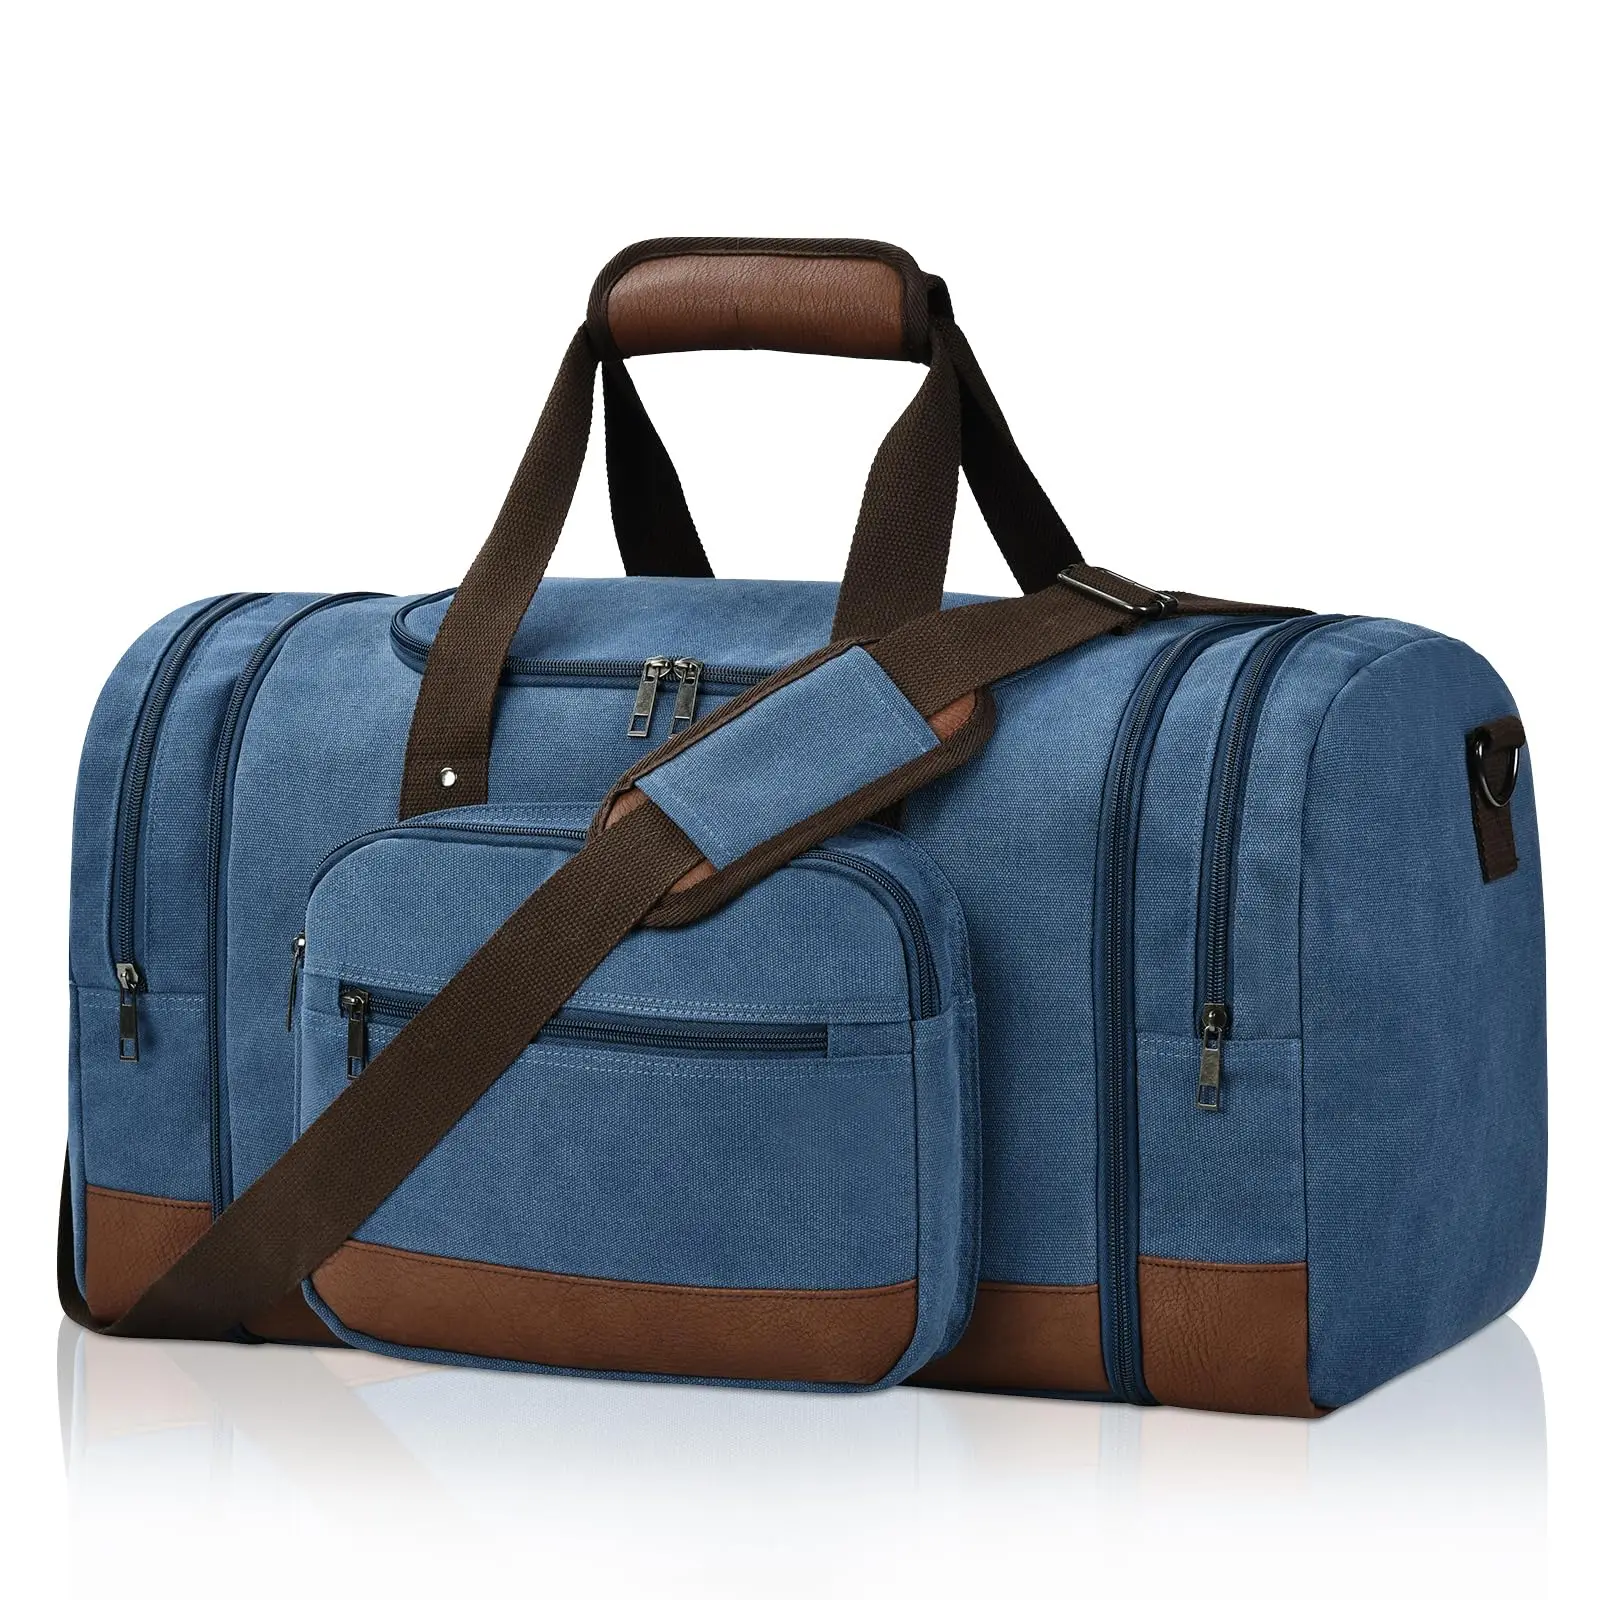 

Travel Duffel , Carry-on Men' Travel Canva Duffle Overnight Weekend Gym Carry-on Duffle Army